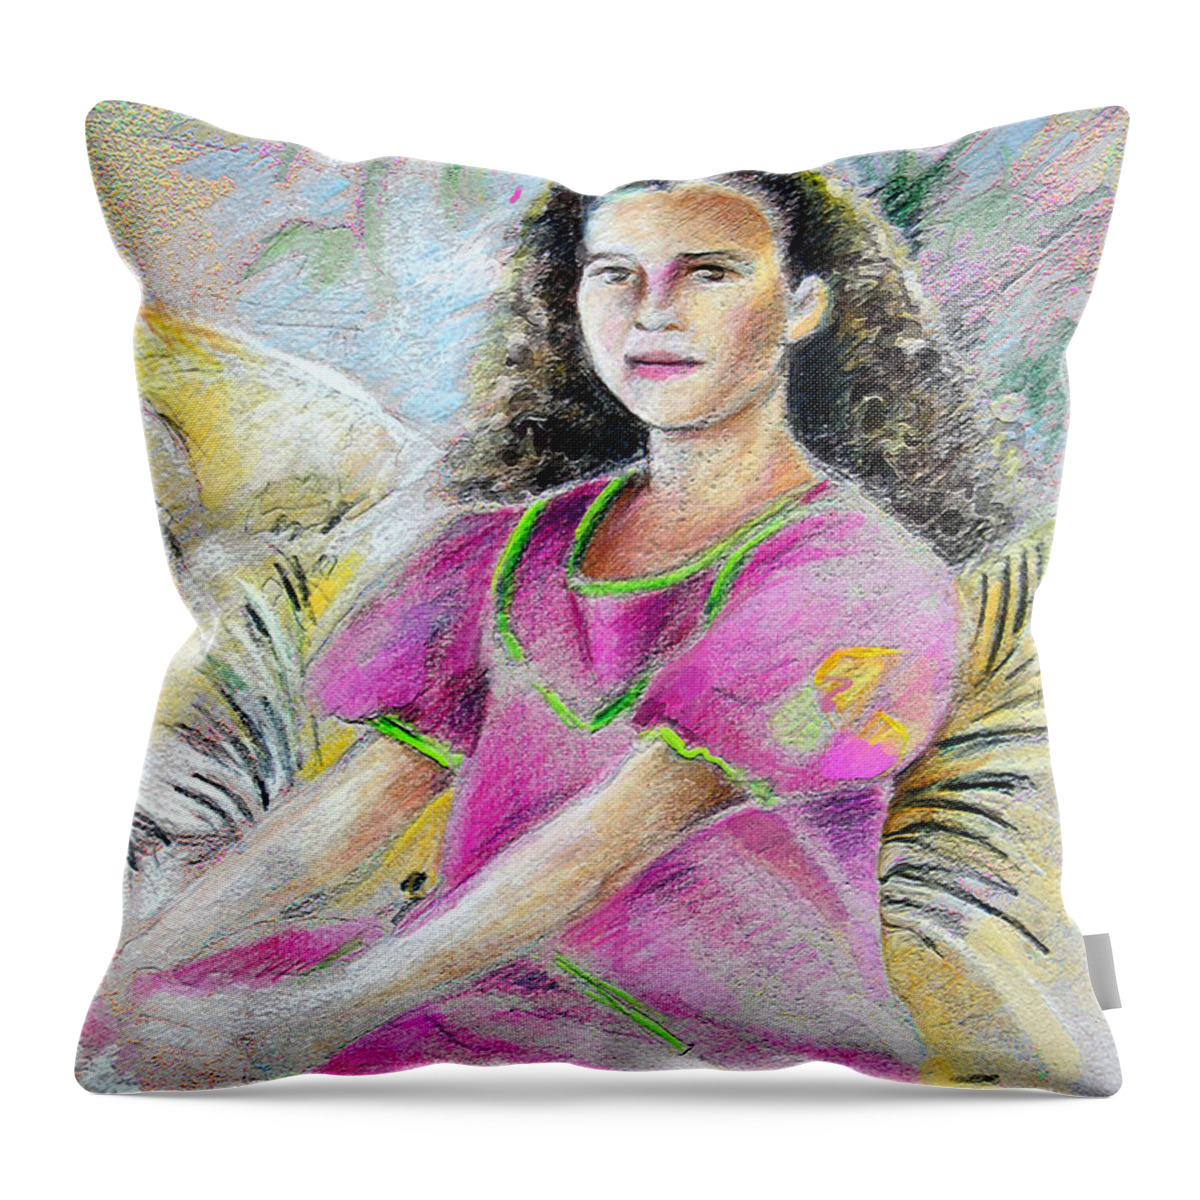 Younf Girl From Tahiti Portrait Throw Pillow featuring the painting Young Girl from Tahiti by Miki De Goodaboom